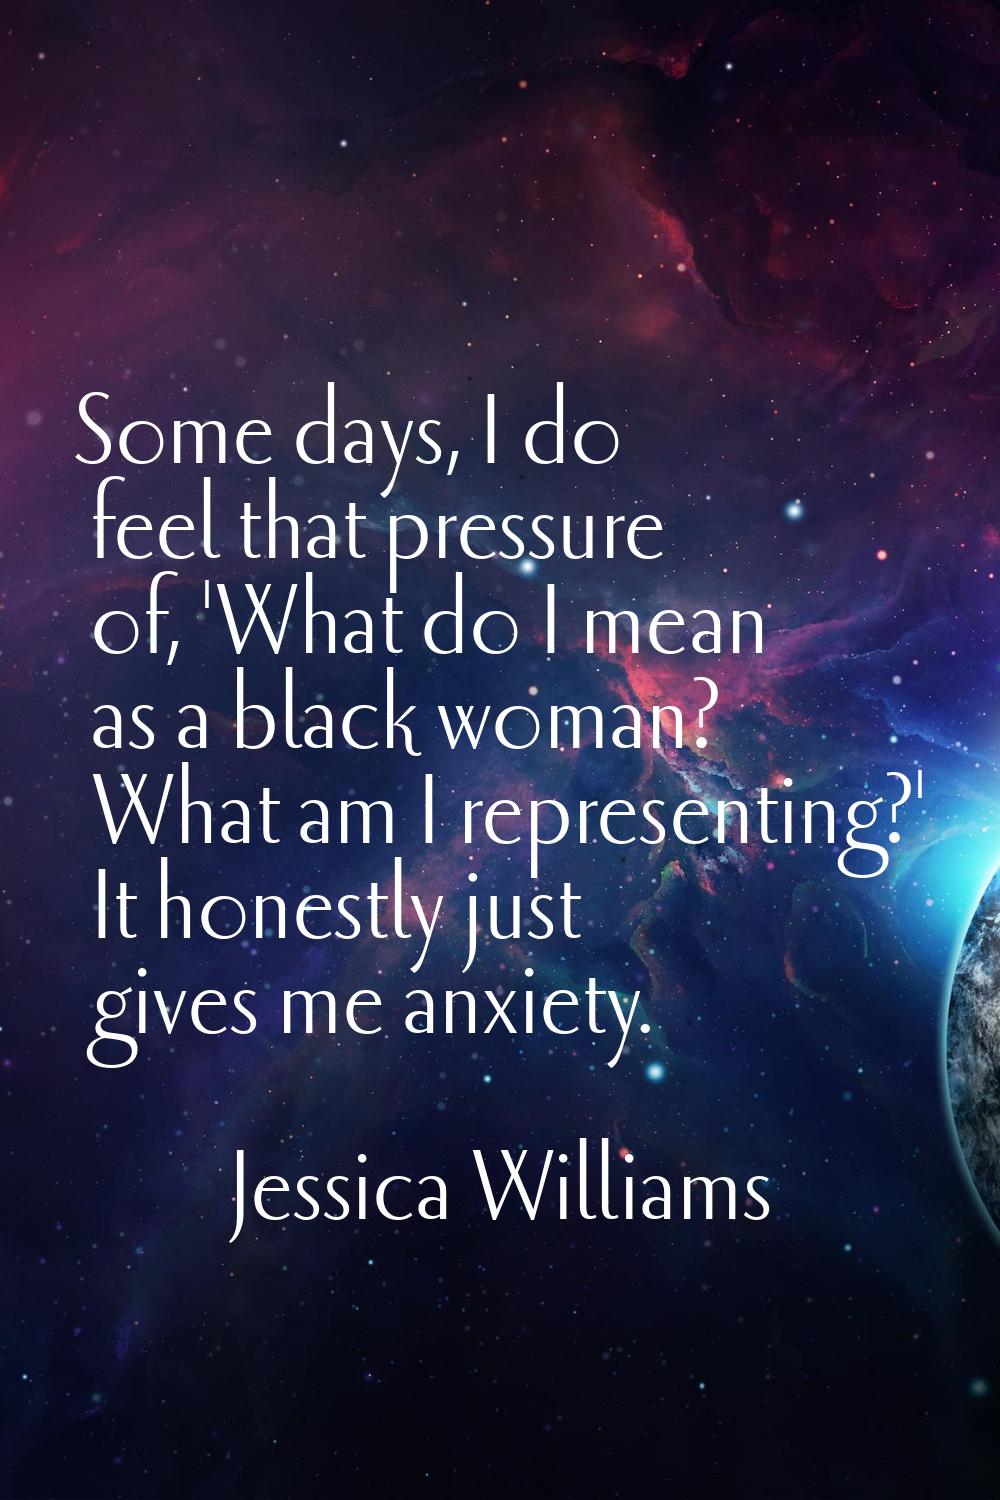 Some days, I do feel that pressure of, 'What do I mean as a black woman? What am I representing?' I